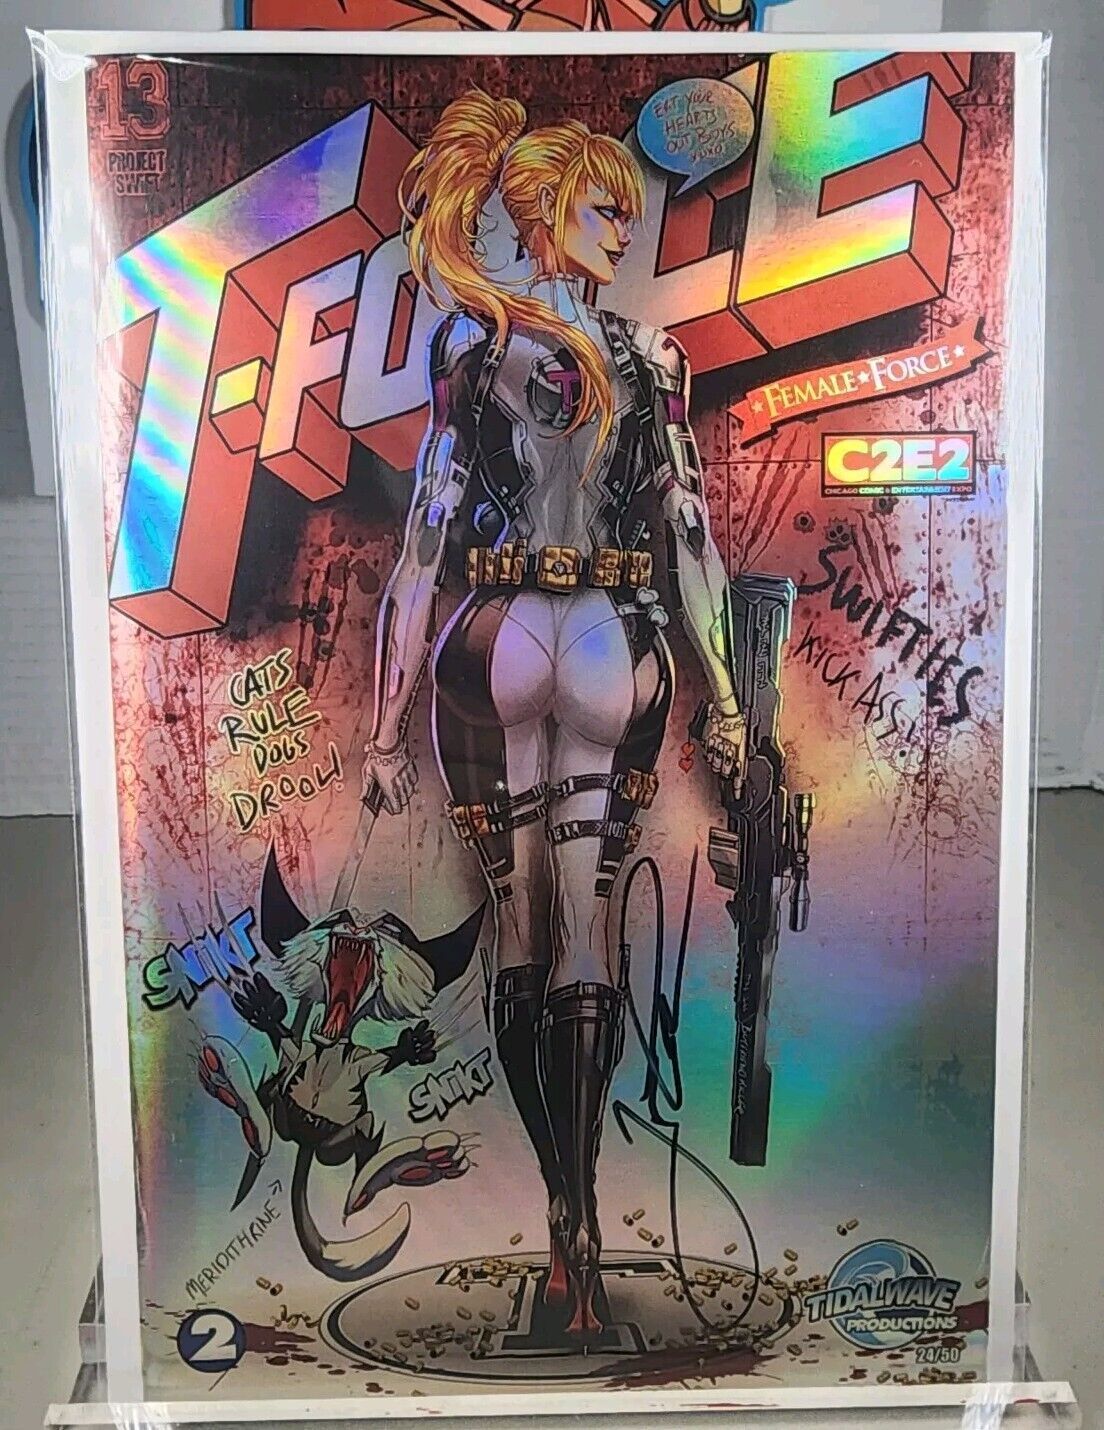 TAYLOR SWIFT Female Force 2 FOIL COVER #24/50  Signed by Tyndall 